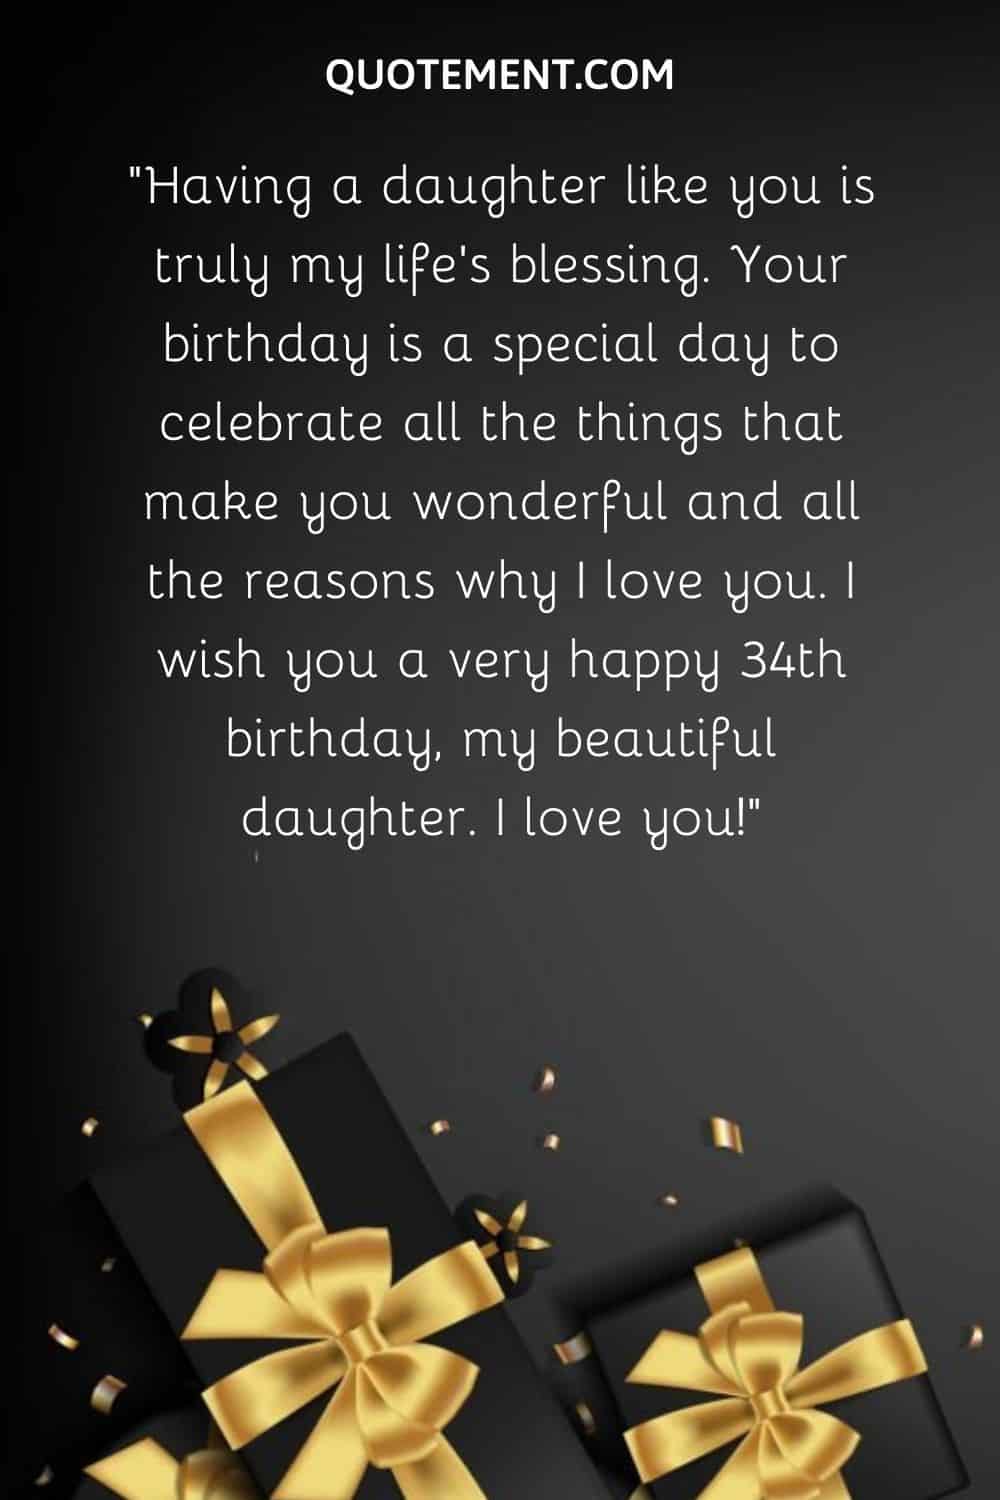 “Having a daughter like you is truly my life’s blessing